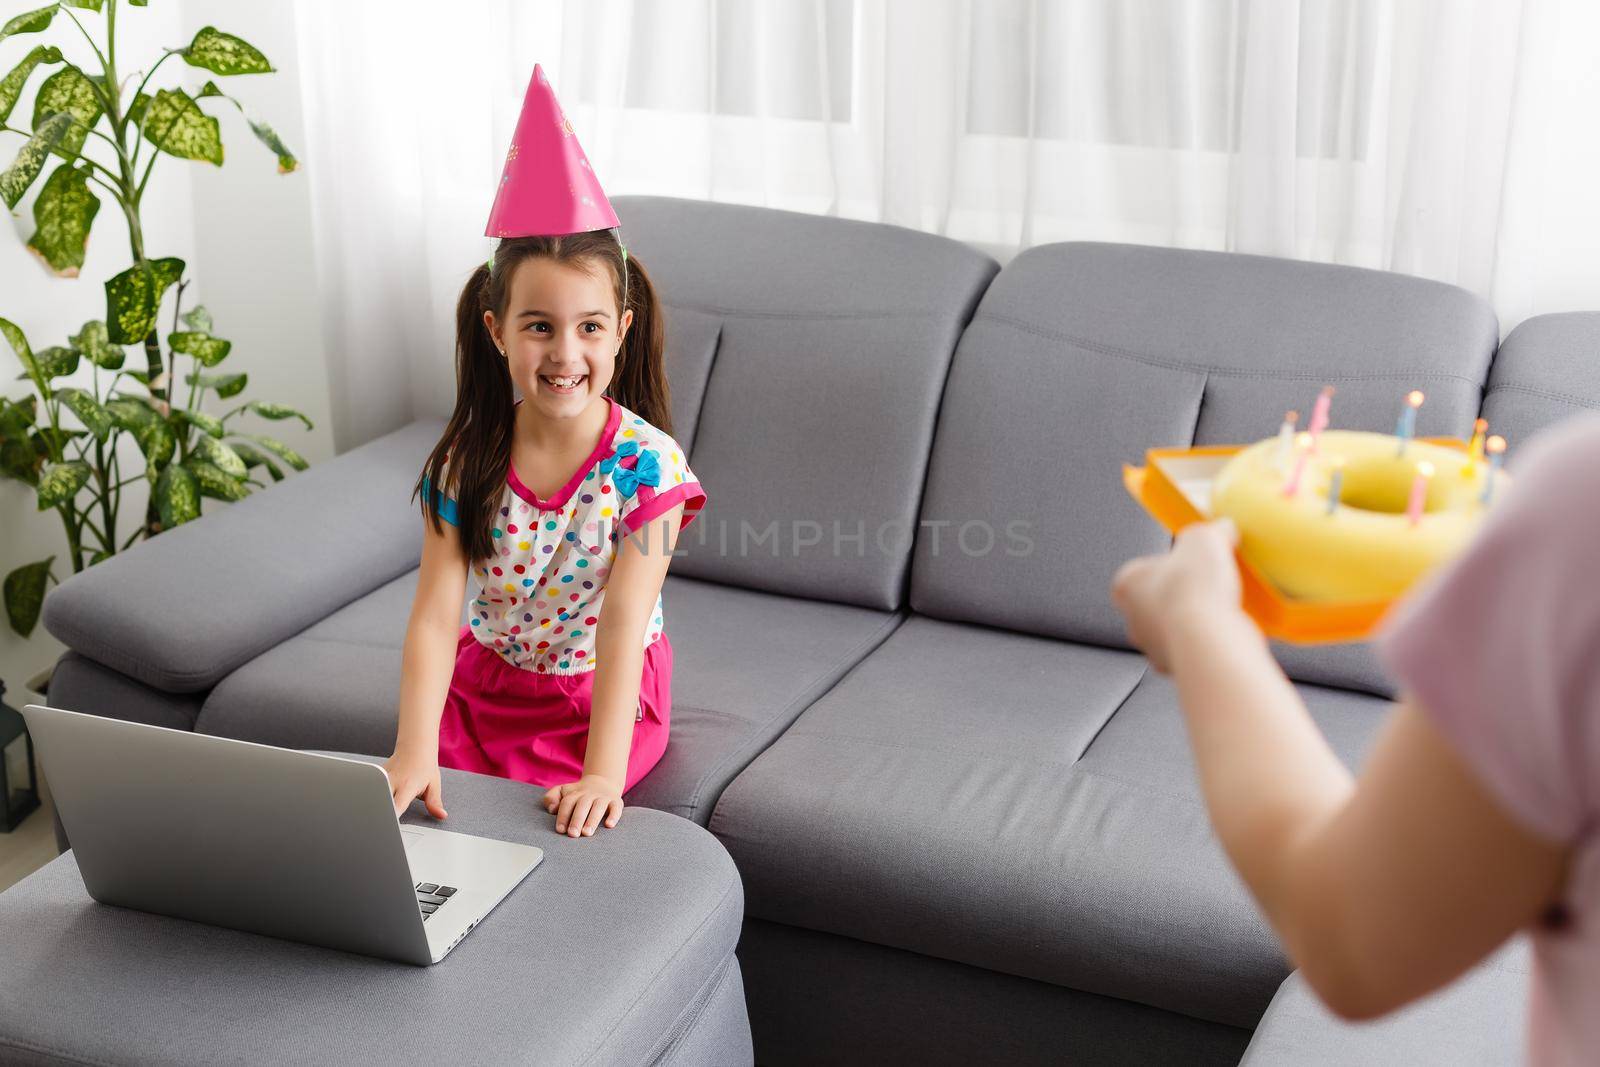 Happy girl sibling celebrating birthday via internet in quarantine time, self-isolation and family values, online birthday party. Congratulations animator via laptop, online. Stay at home by Andelov13